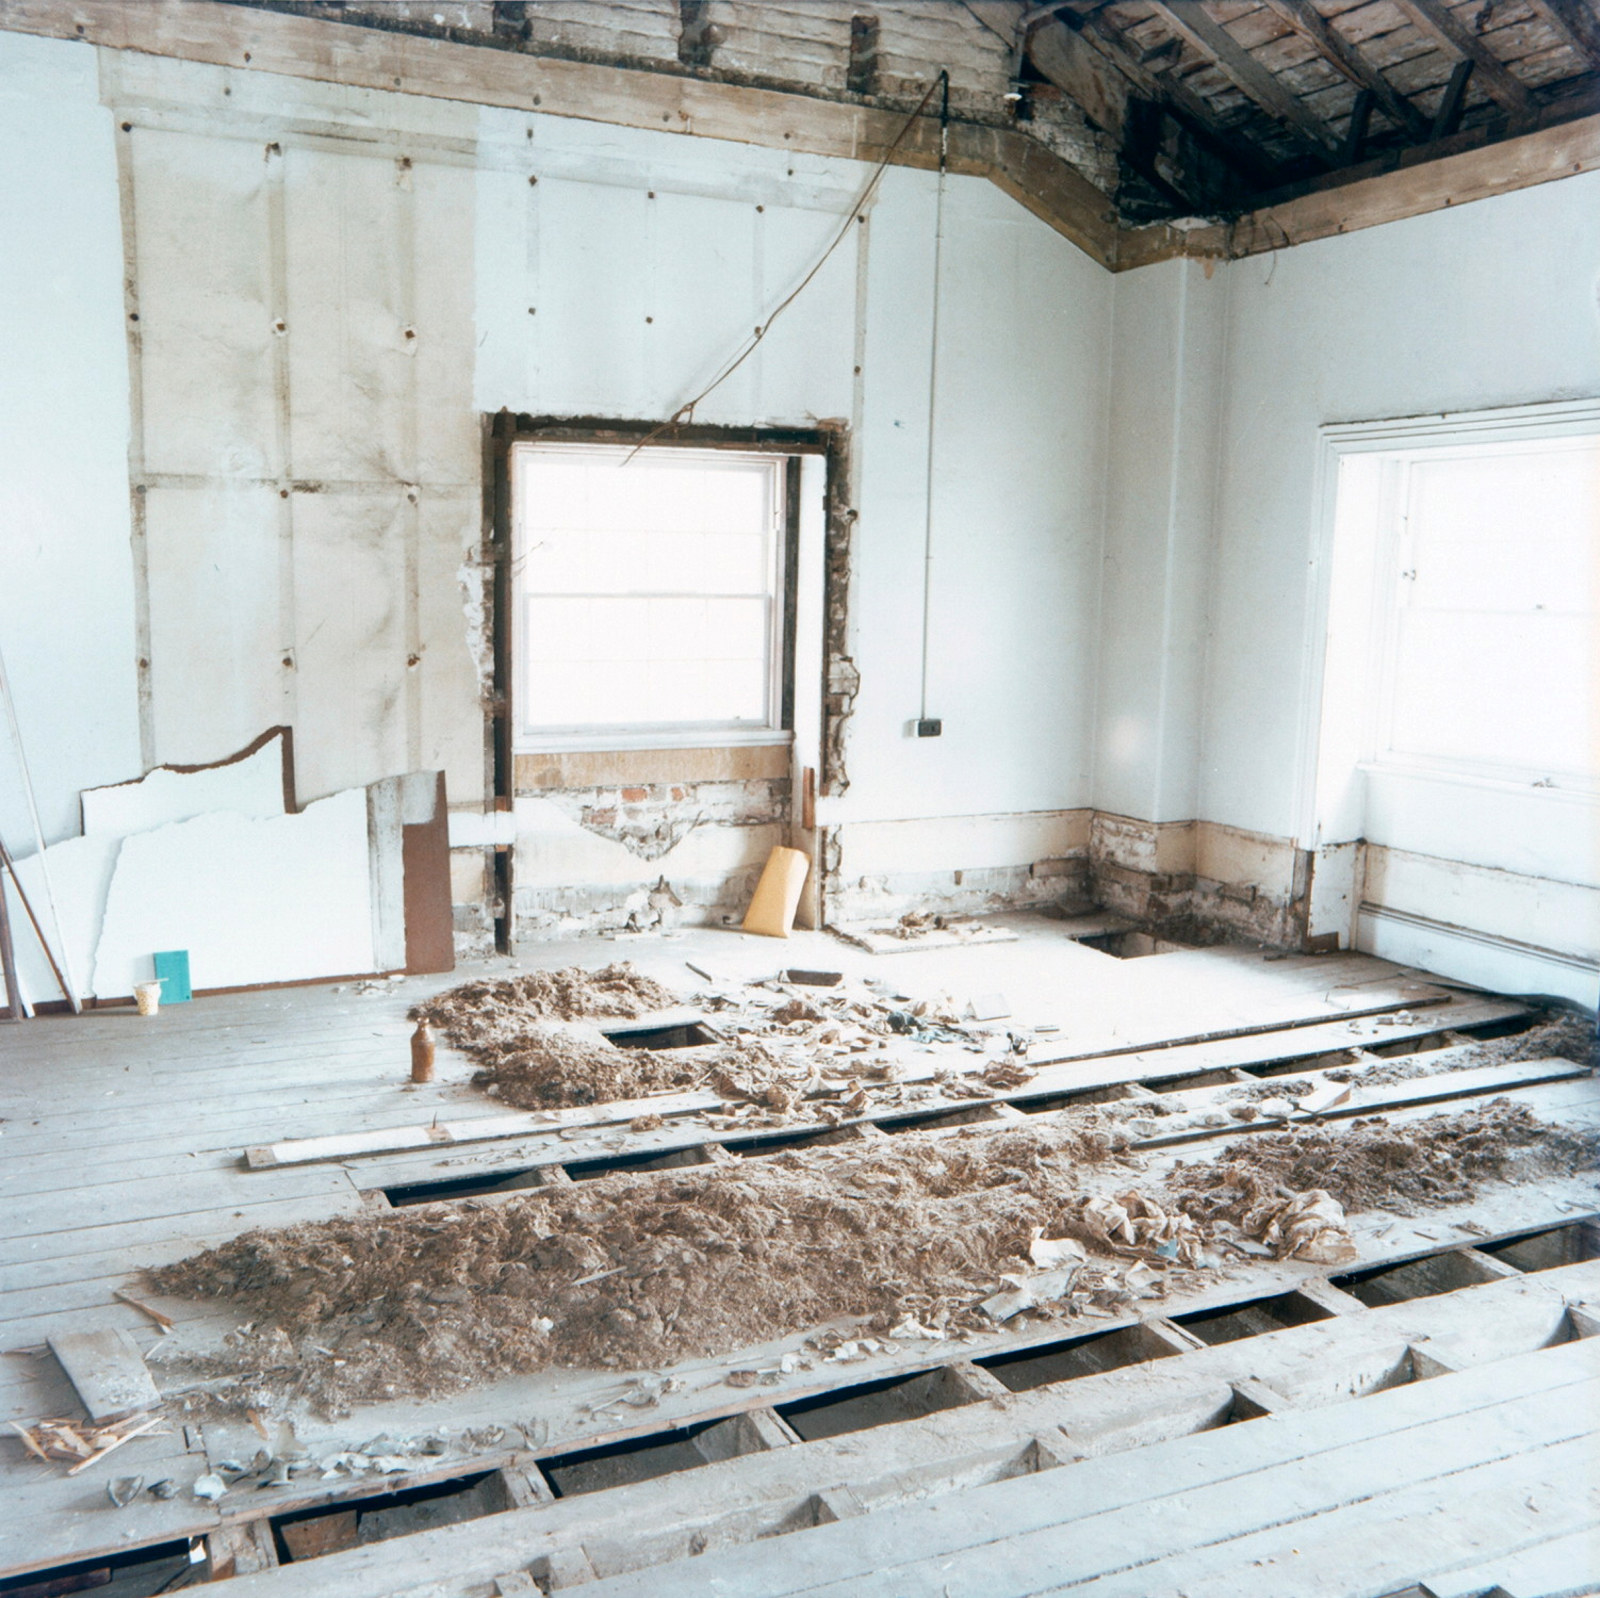 Room with wooden floorboards lifted in centre, with piles of extracted materials.